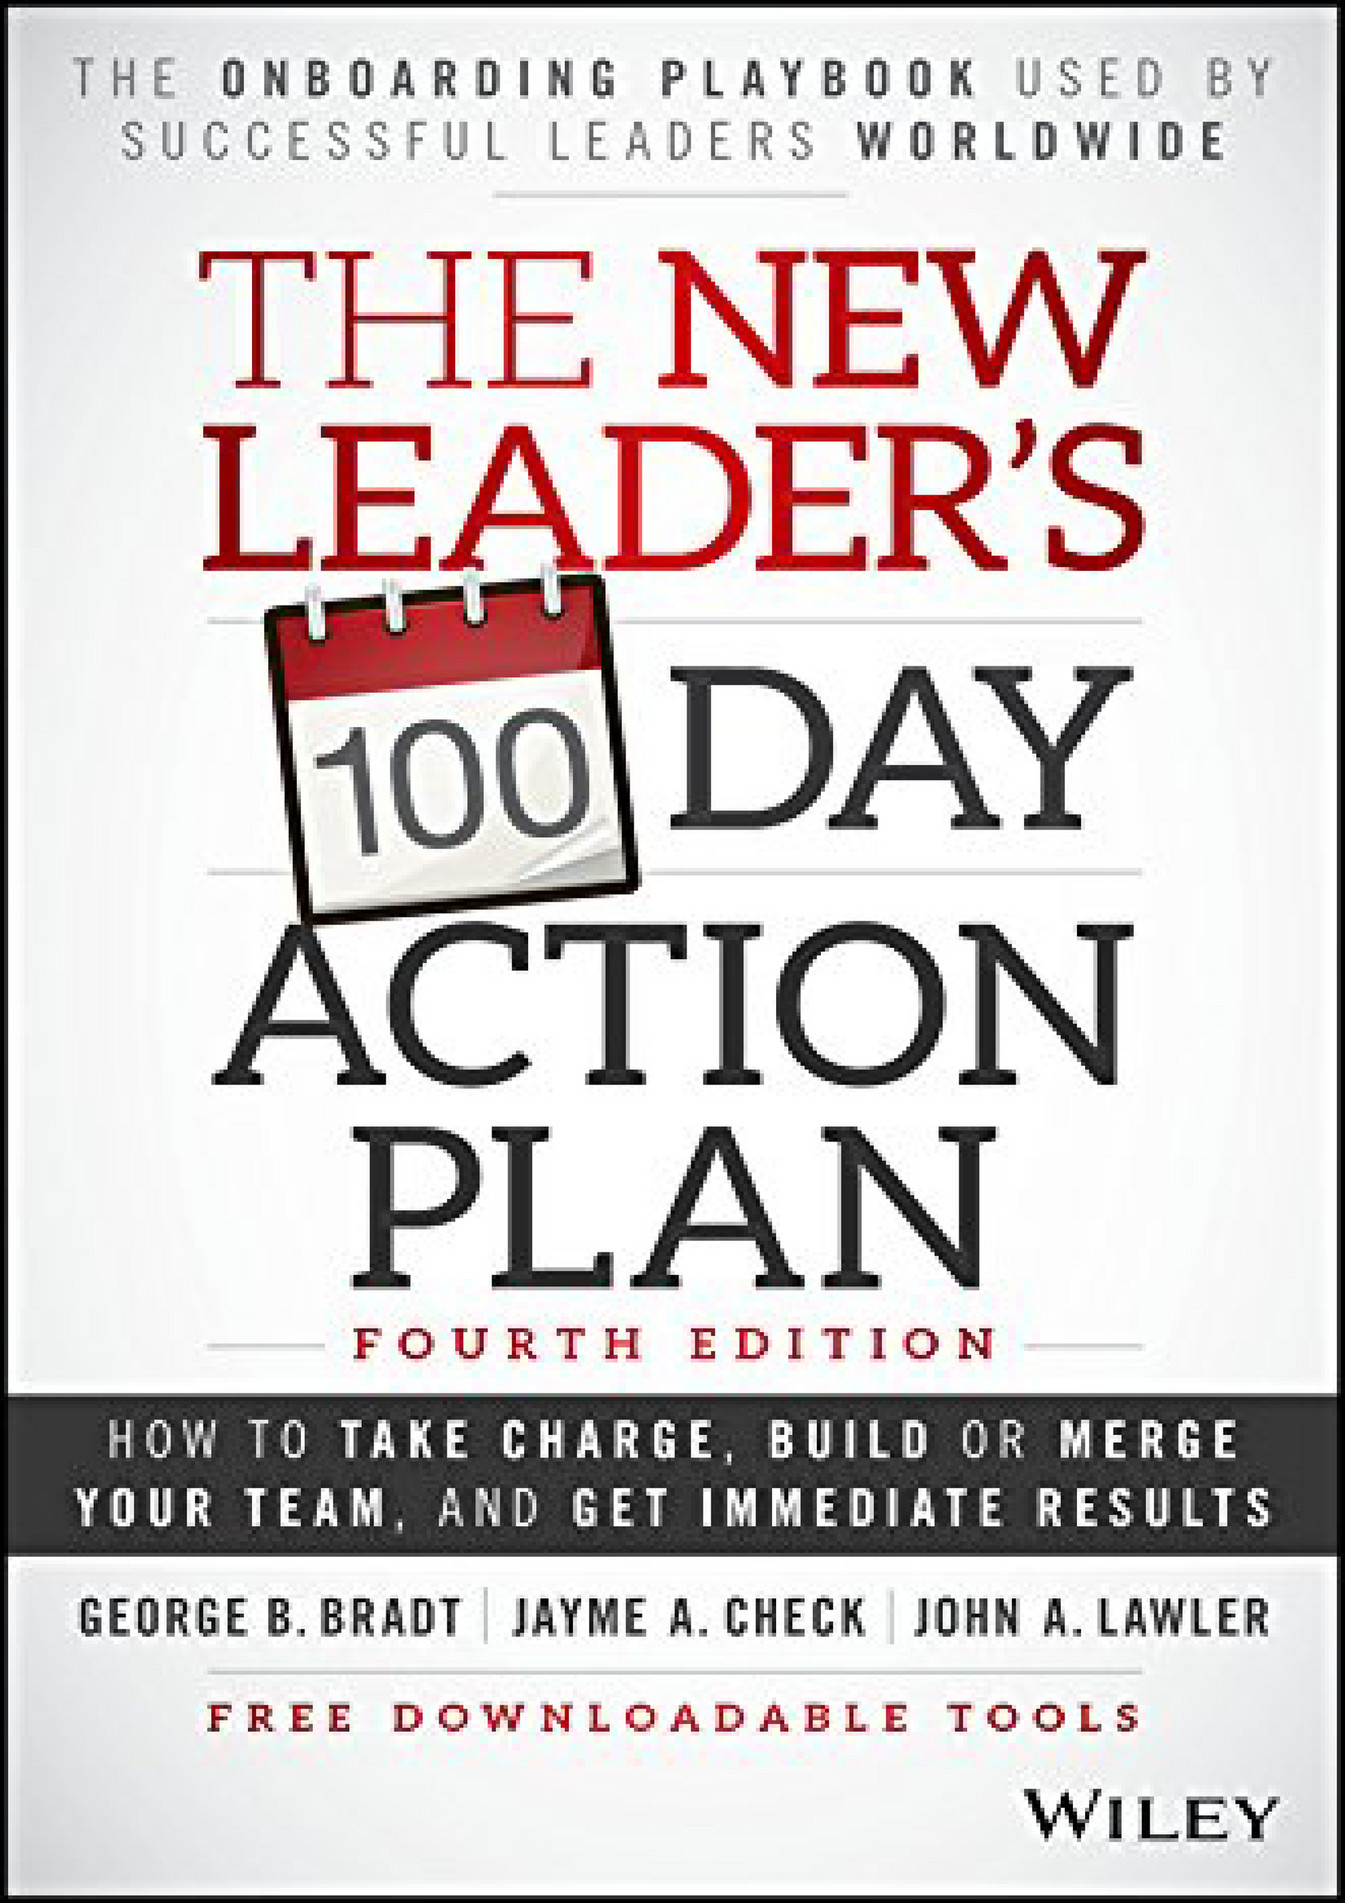 new leader's 100 day action plan checklist